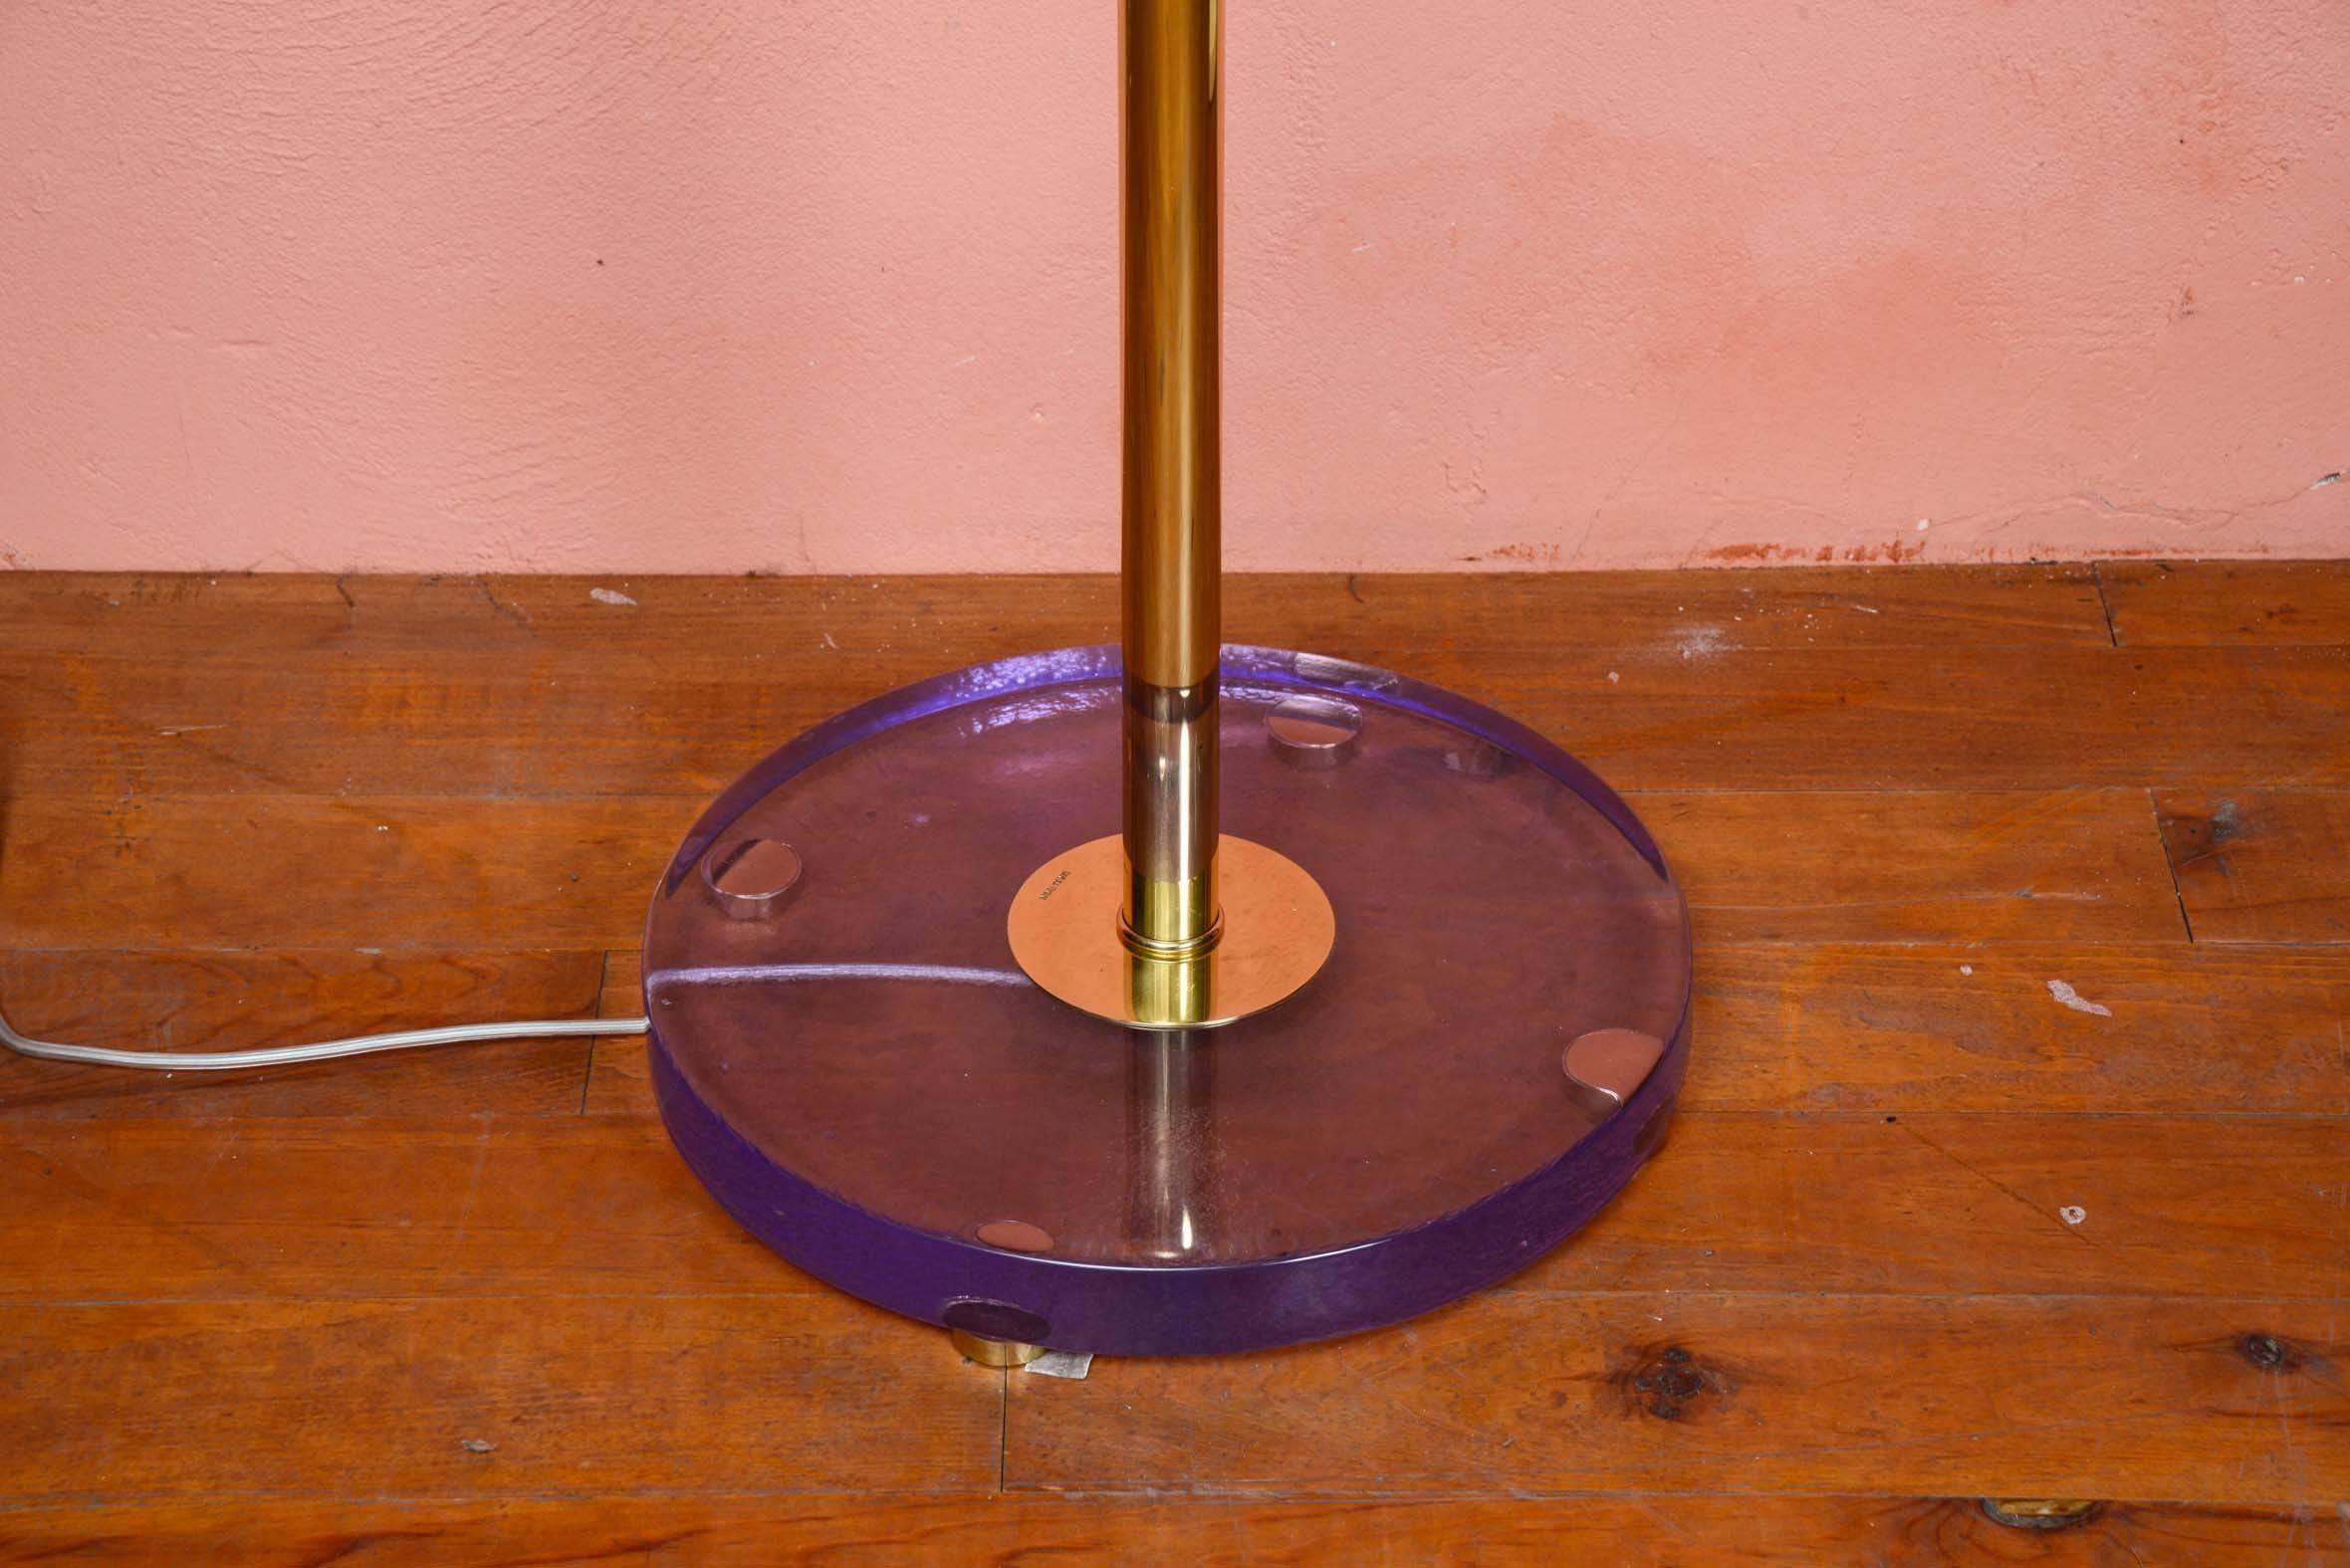 Fantastic floor lamp designed by Gianluca Fontana for Régis Royant Gallery.
Possibility of a second one.